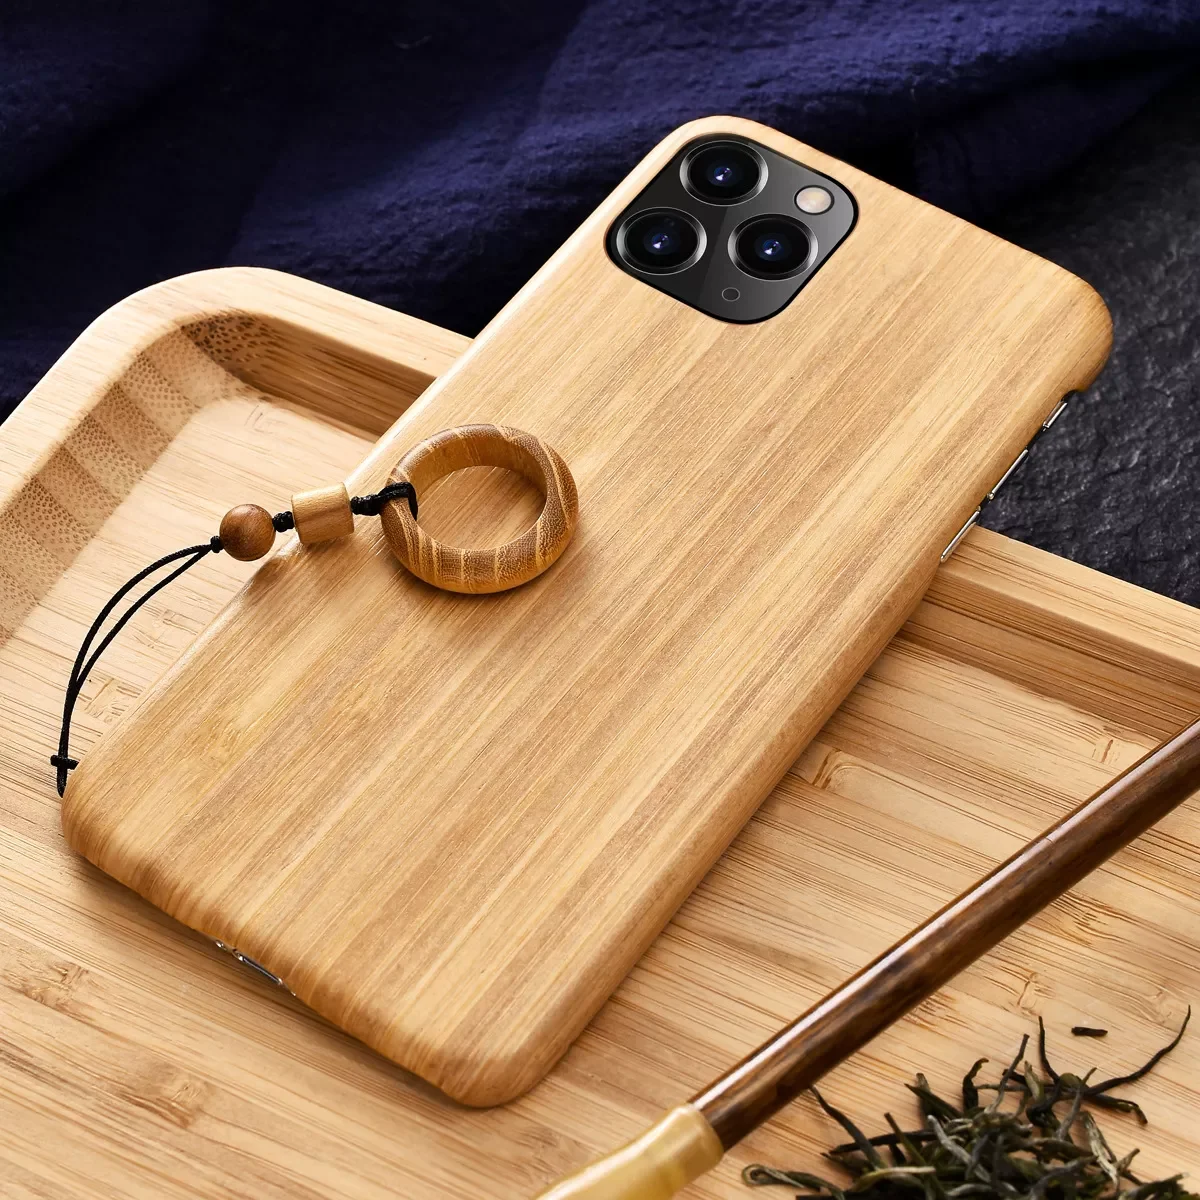 

Funda Case for iPhone 13 Pro Max 12 Pro Max 11 Pro XS Max XR 6 7 8 Plus Fashion Coque Carbonized Bamboo Phone Case Cover Capa